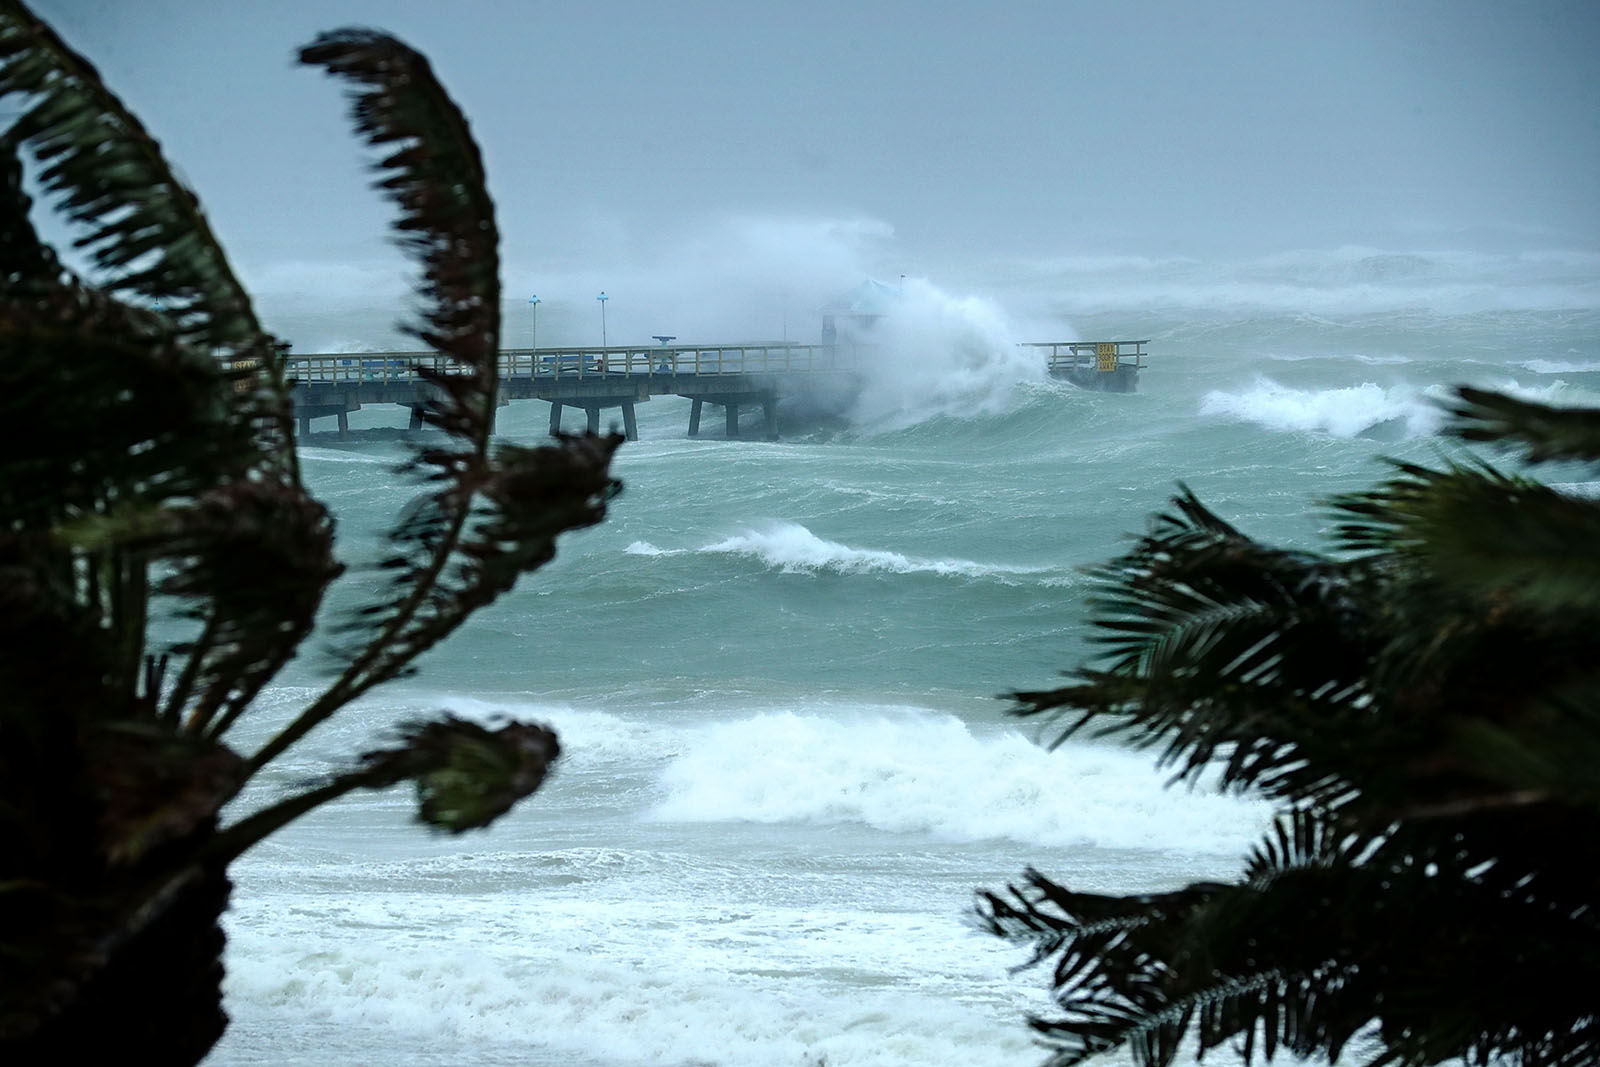 Large waves produced by Hurricane Irma crash into the end of Anglins Fishing Pier Sept. 10, 2017 in Fort Lauderdale, Florida. The category 4 hurricane made landfall in the United States in the Florida Keys at 9:10 a.m. after raking across the north coast of Cuba.  (Photo by Chip Somodevilla/Getty Images)